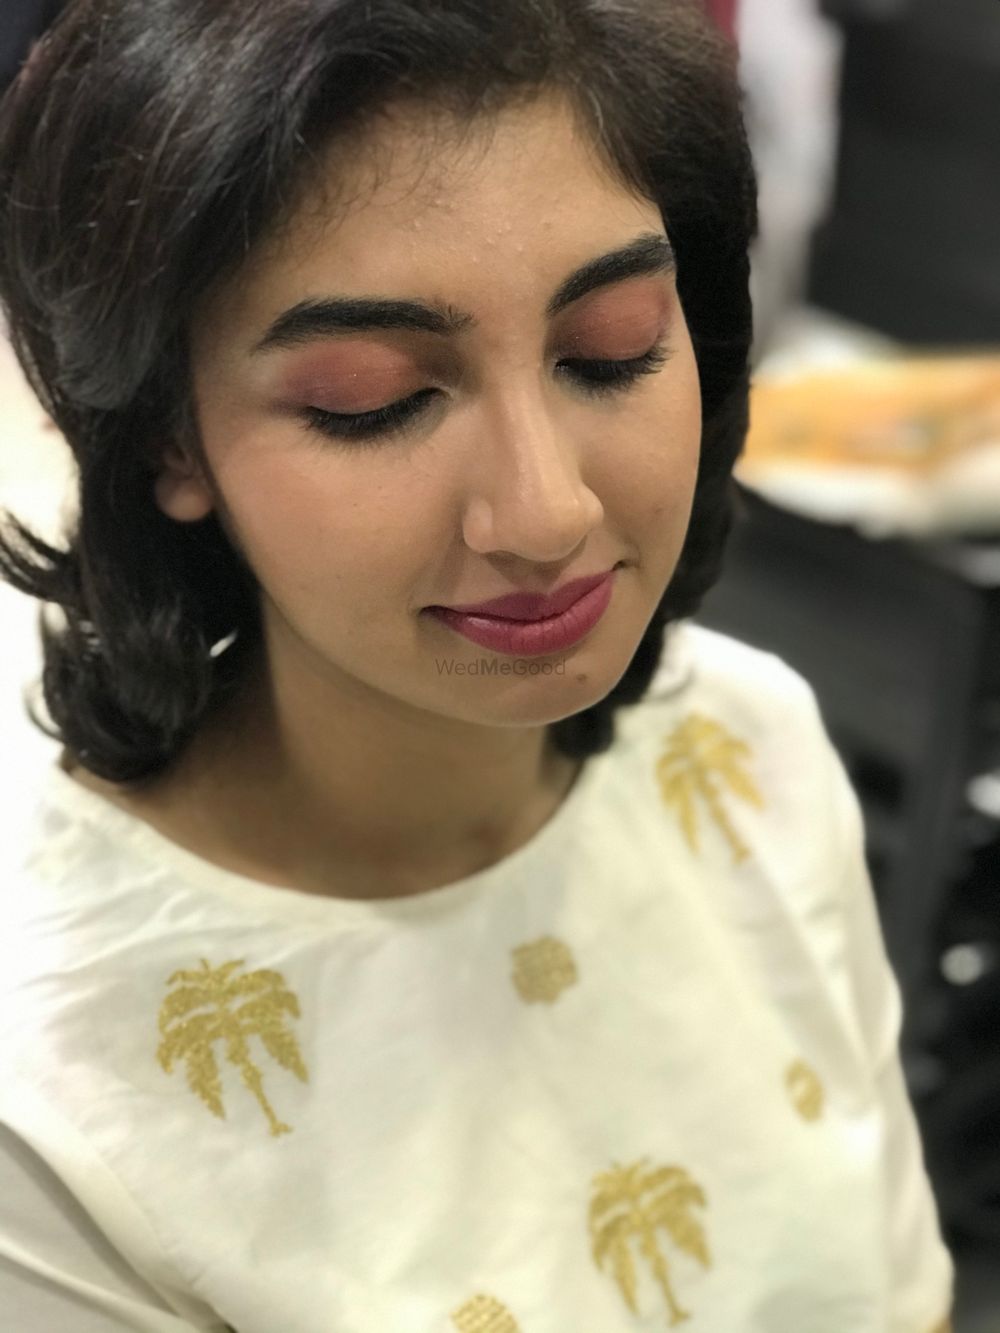 Photo From Party makeup - By Neha Makeovers